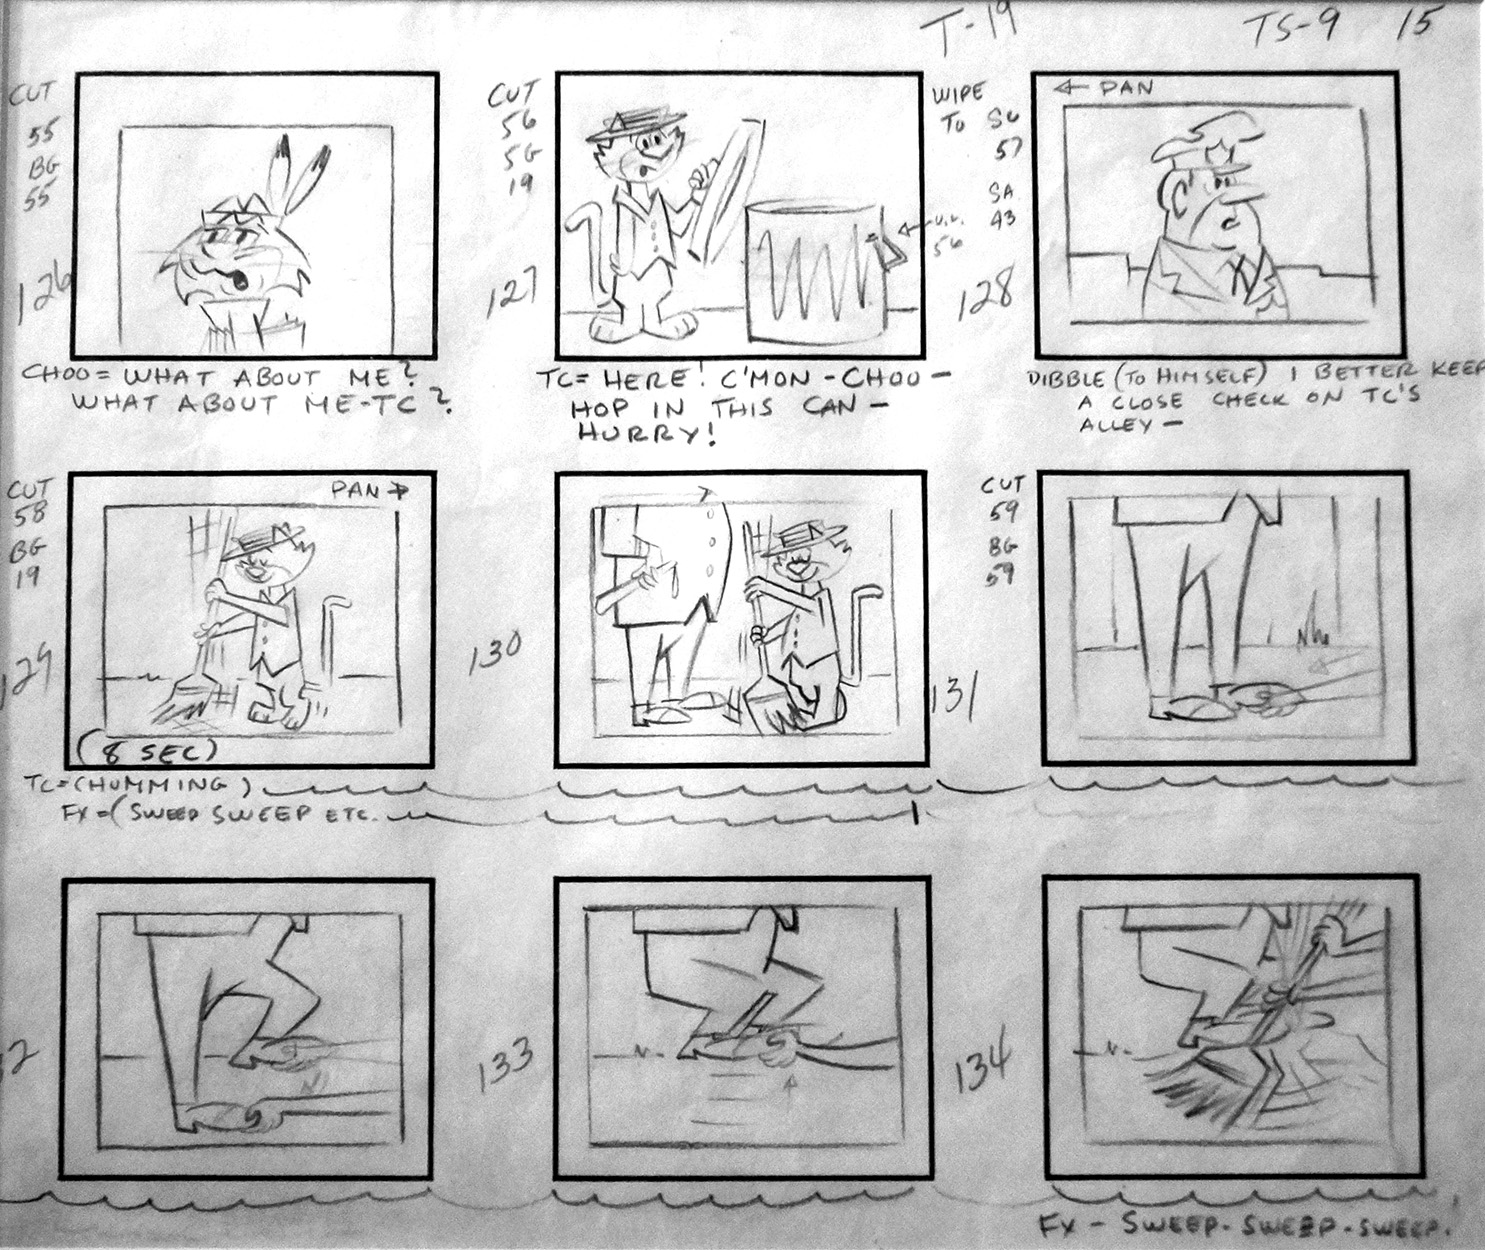 Top Cat Storyboard Sequence 2 (Original) art by Hanna-Barbera Studio at The Illustration Art Gallery